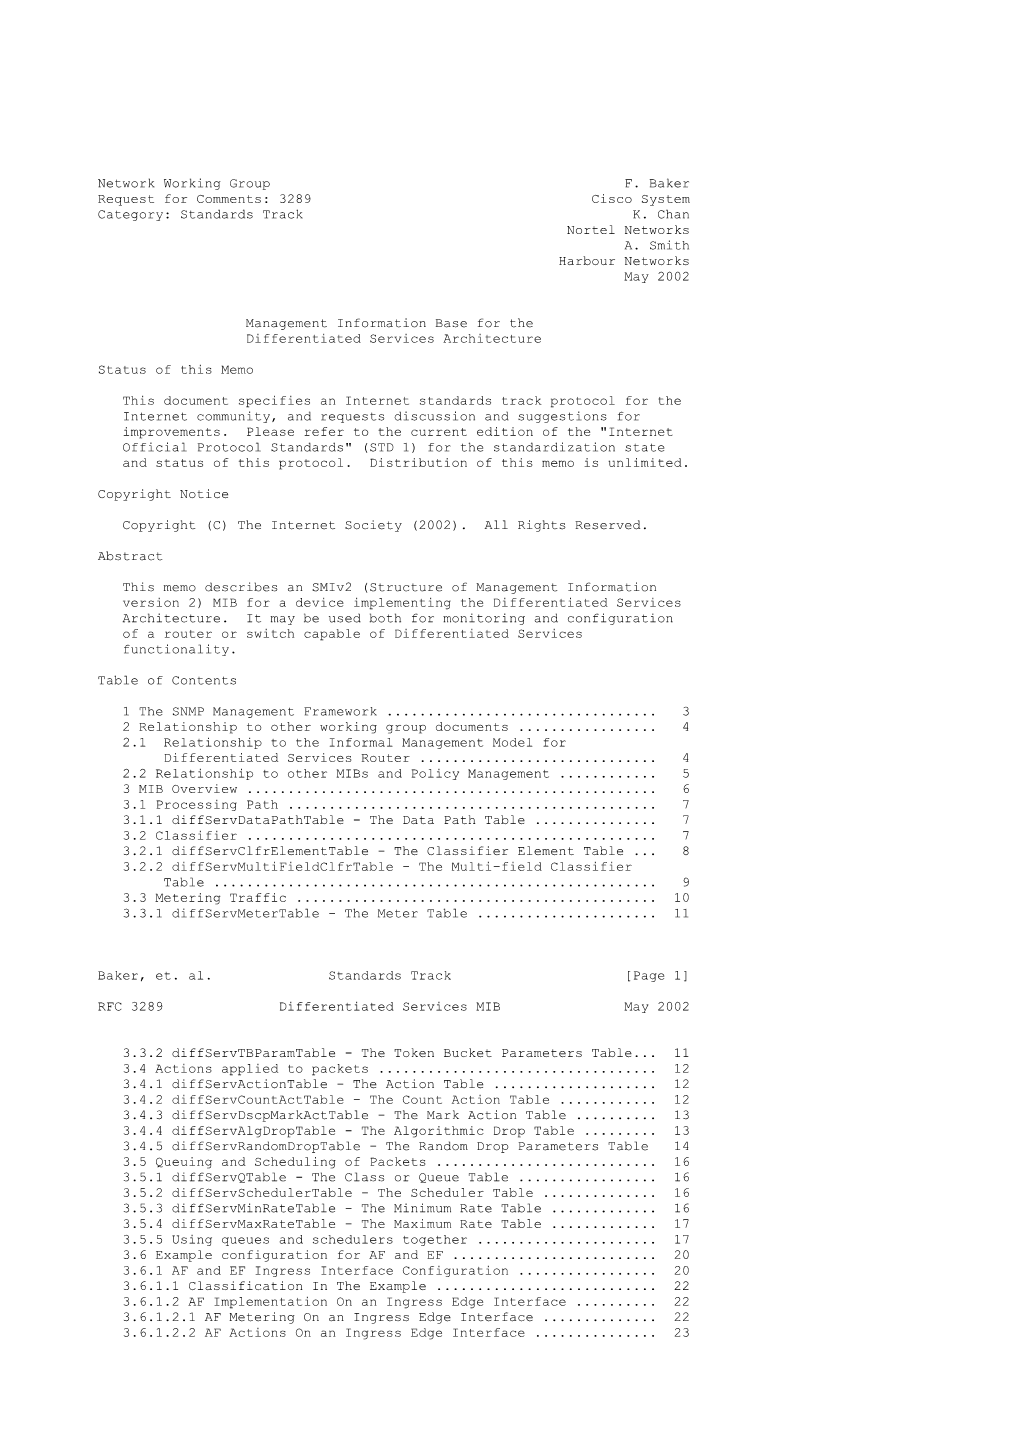 Network Working Group F. Baker Request for Comments: 3289 Cisco System Category: Standards Track K